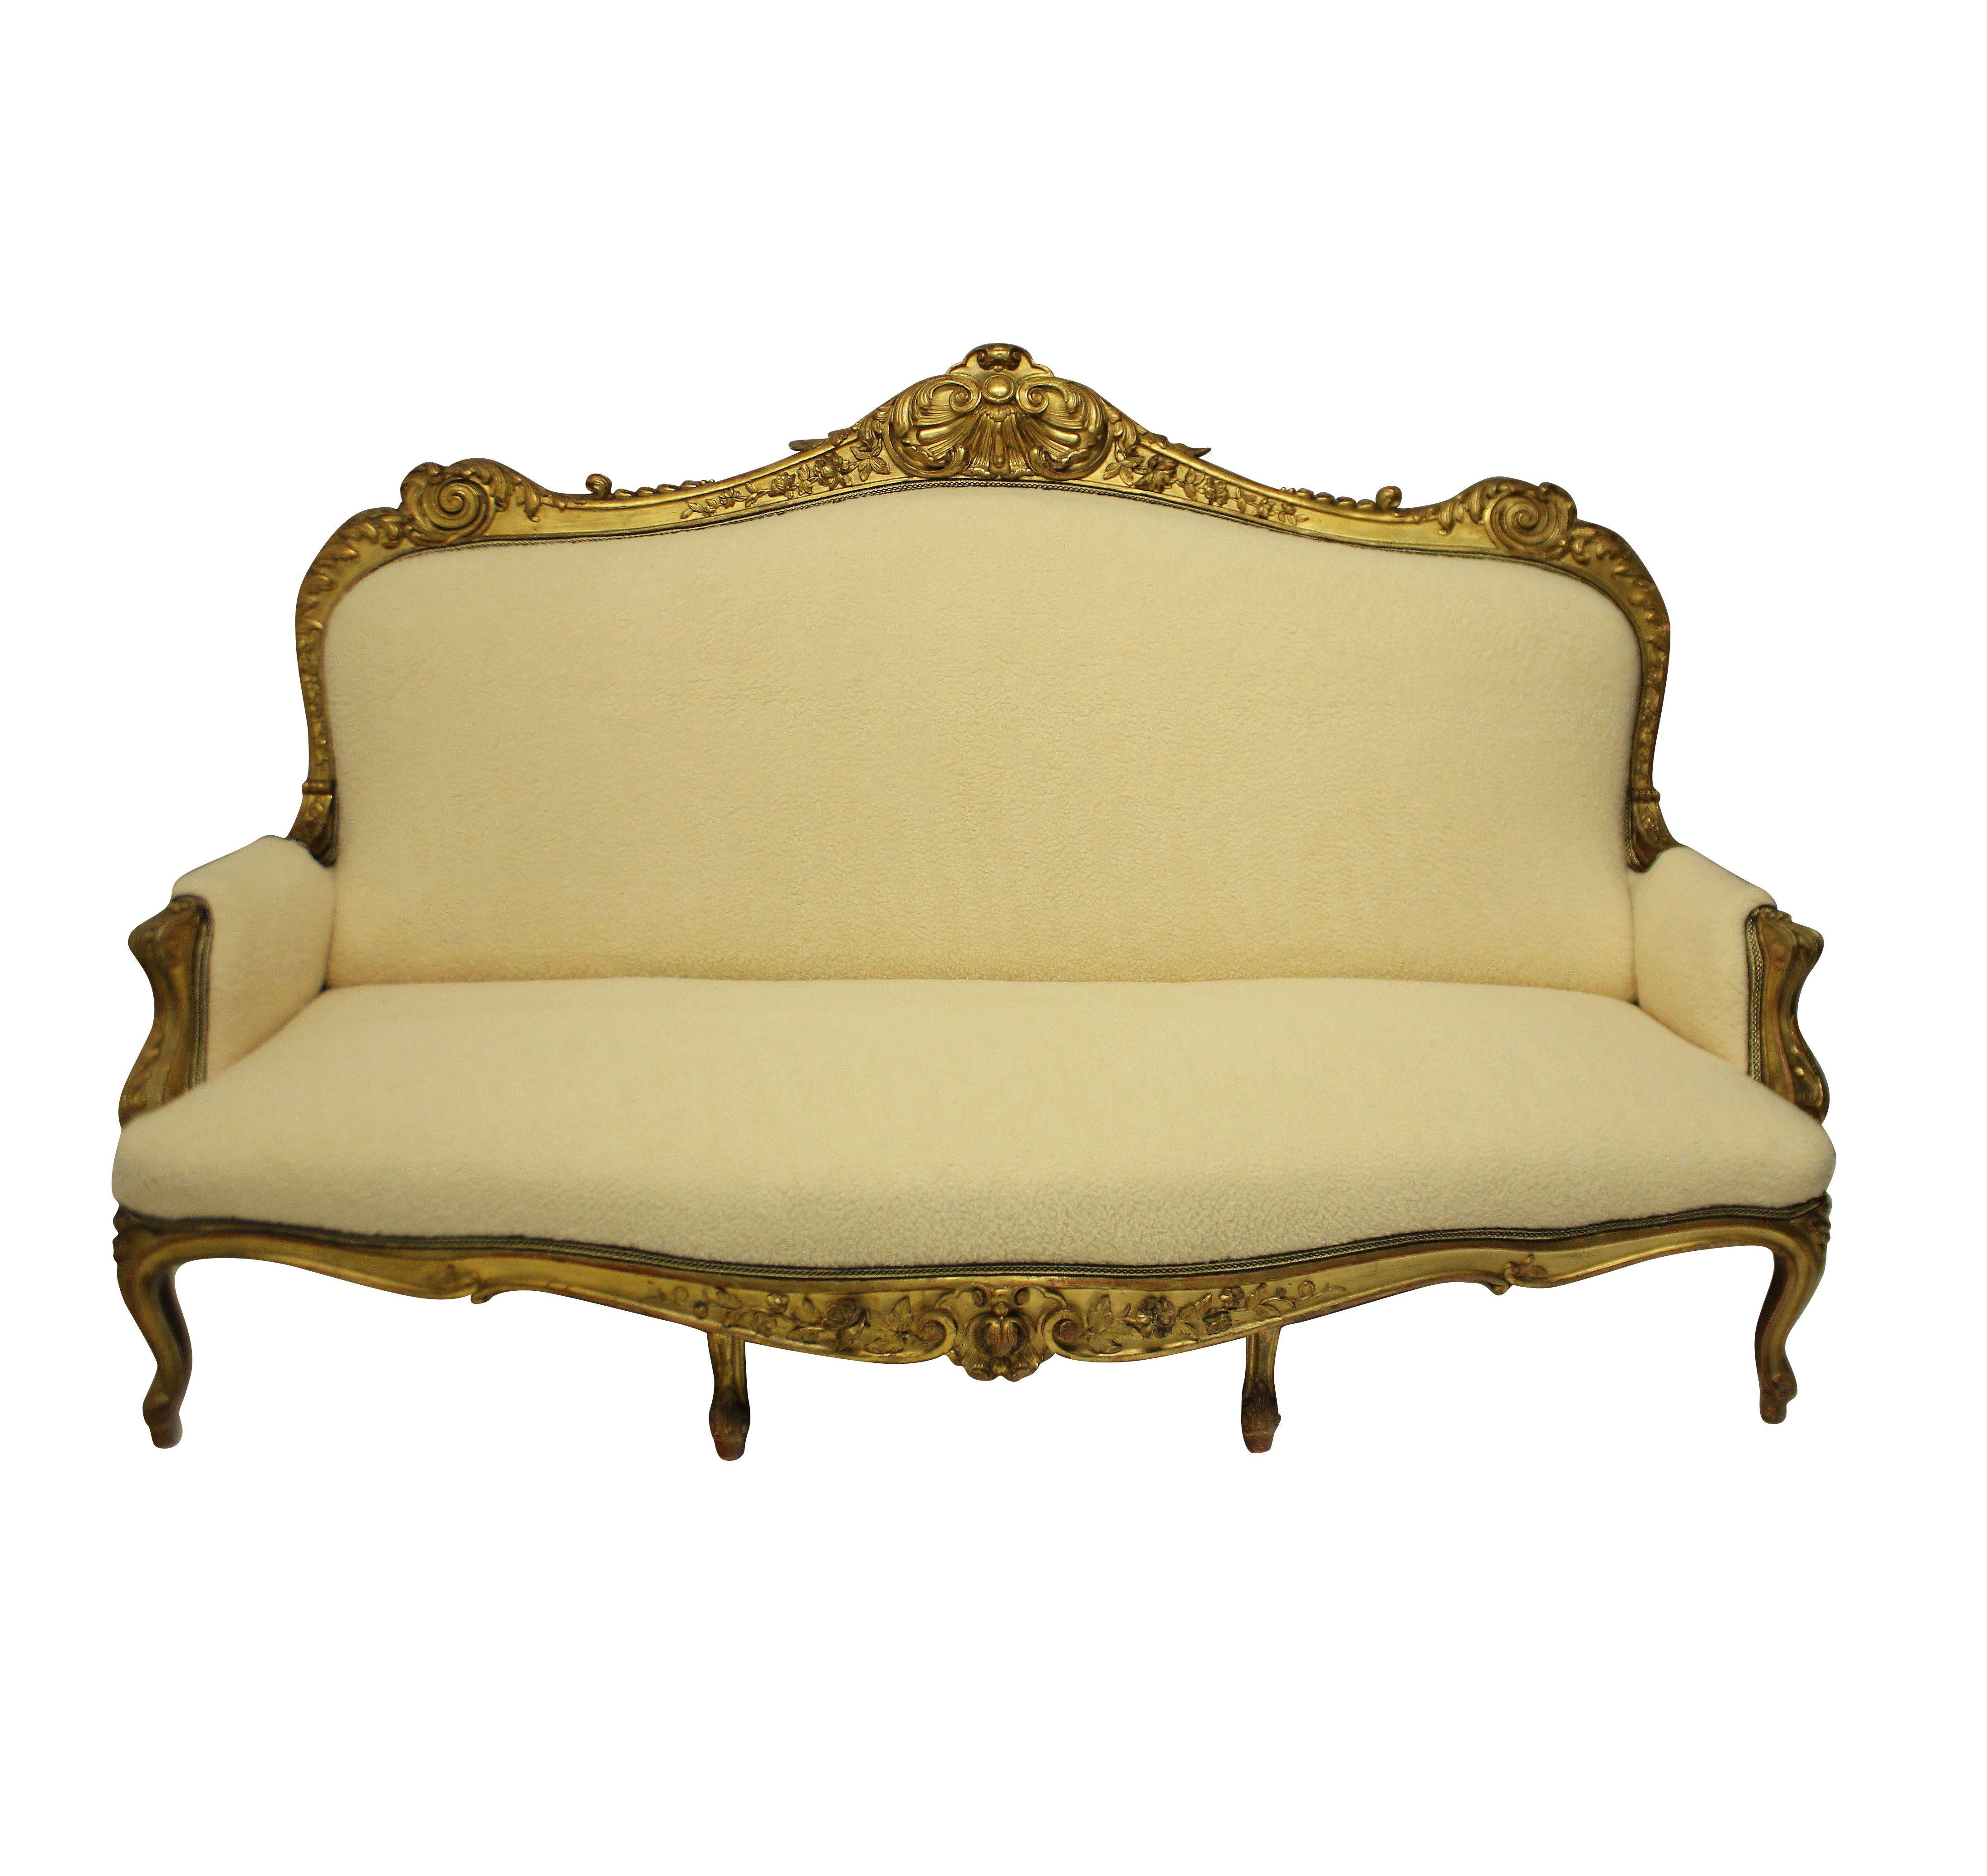 Giltwood Large English Water Gilded and Finely Carved Settee